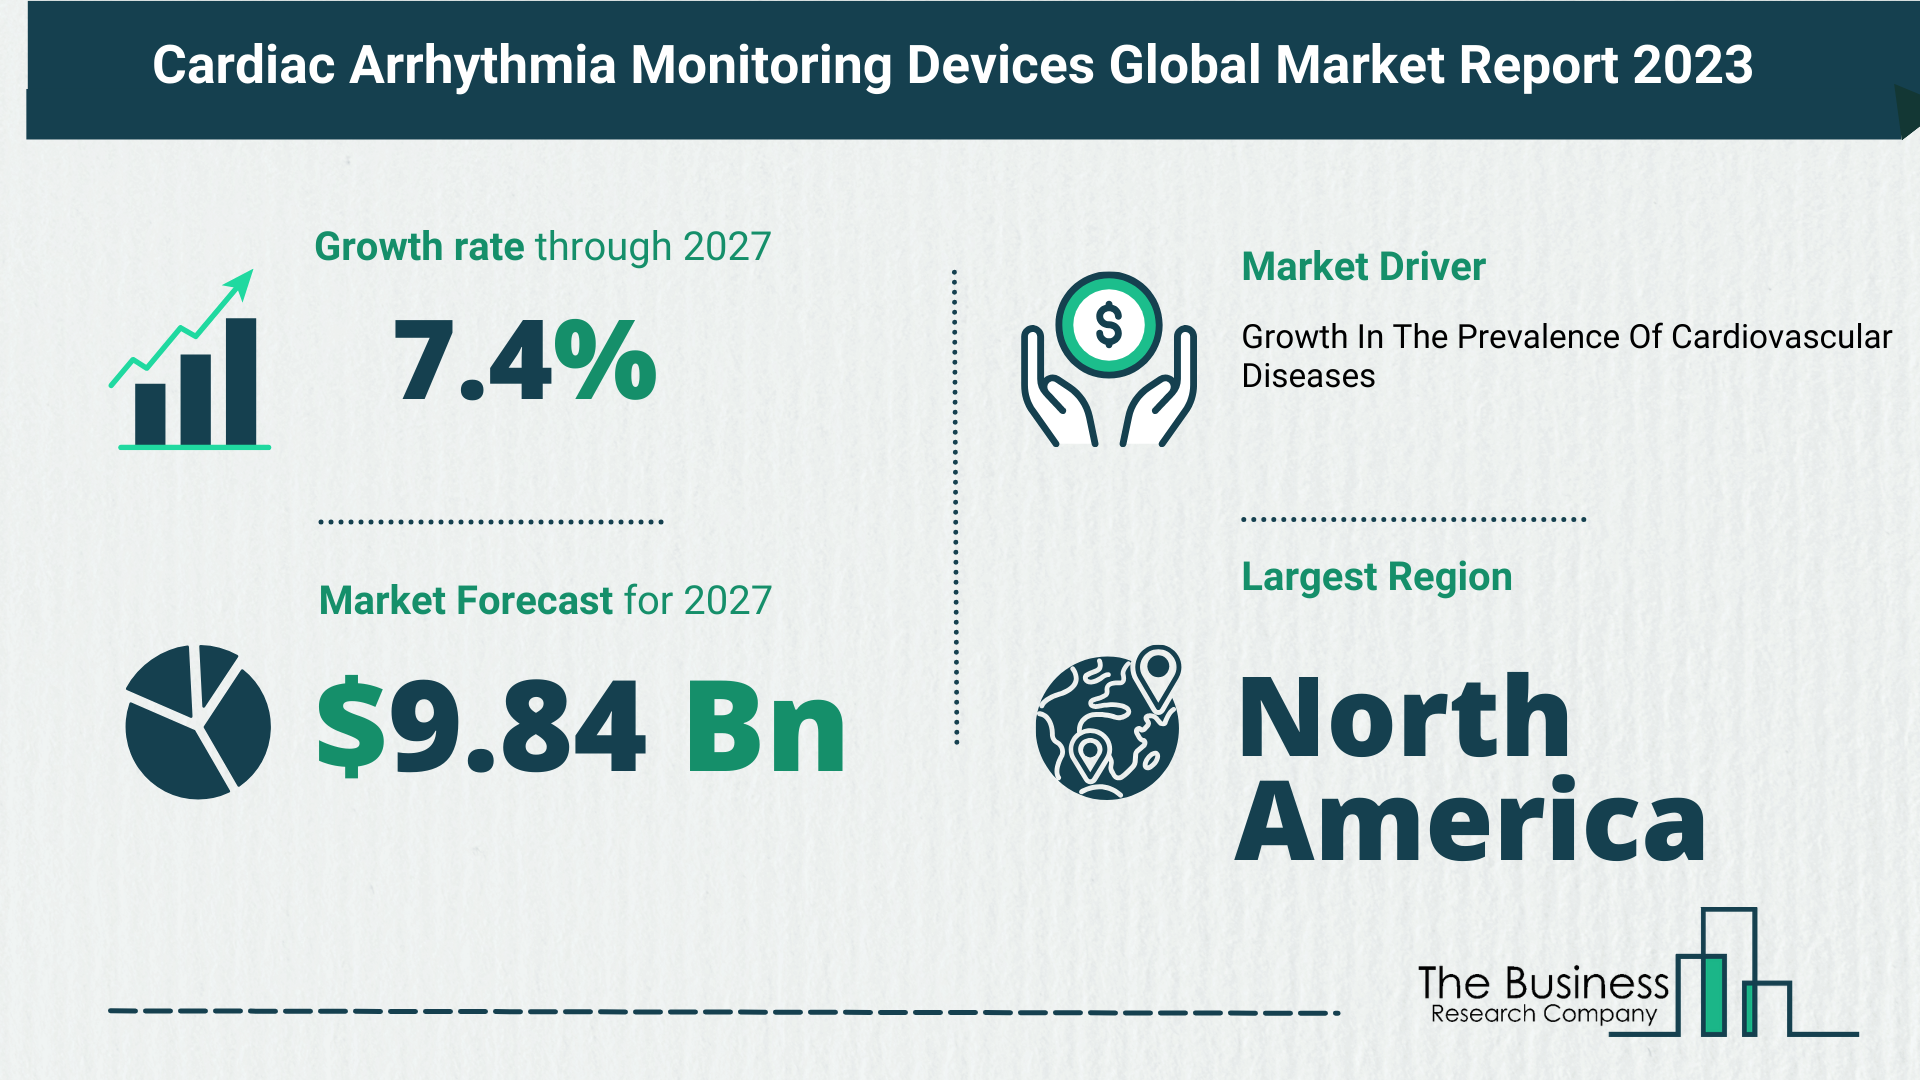 Global Cardiac Arrhythmia Monitoring Devices Market Analysis: Estimated Market Size And Growth Rate